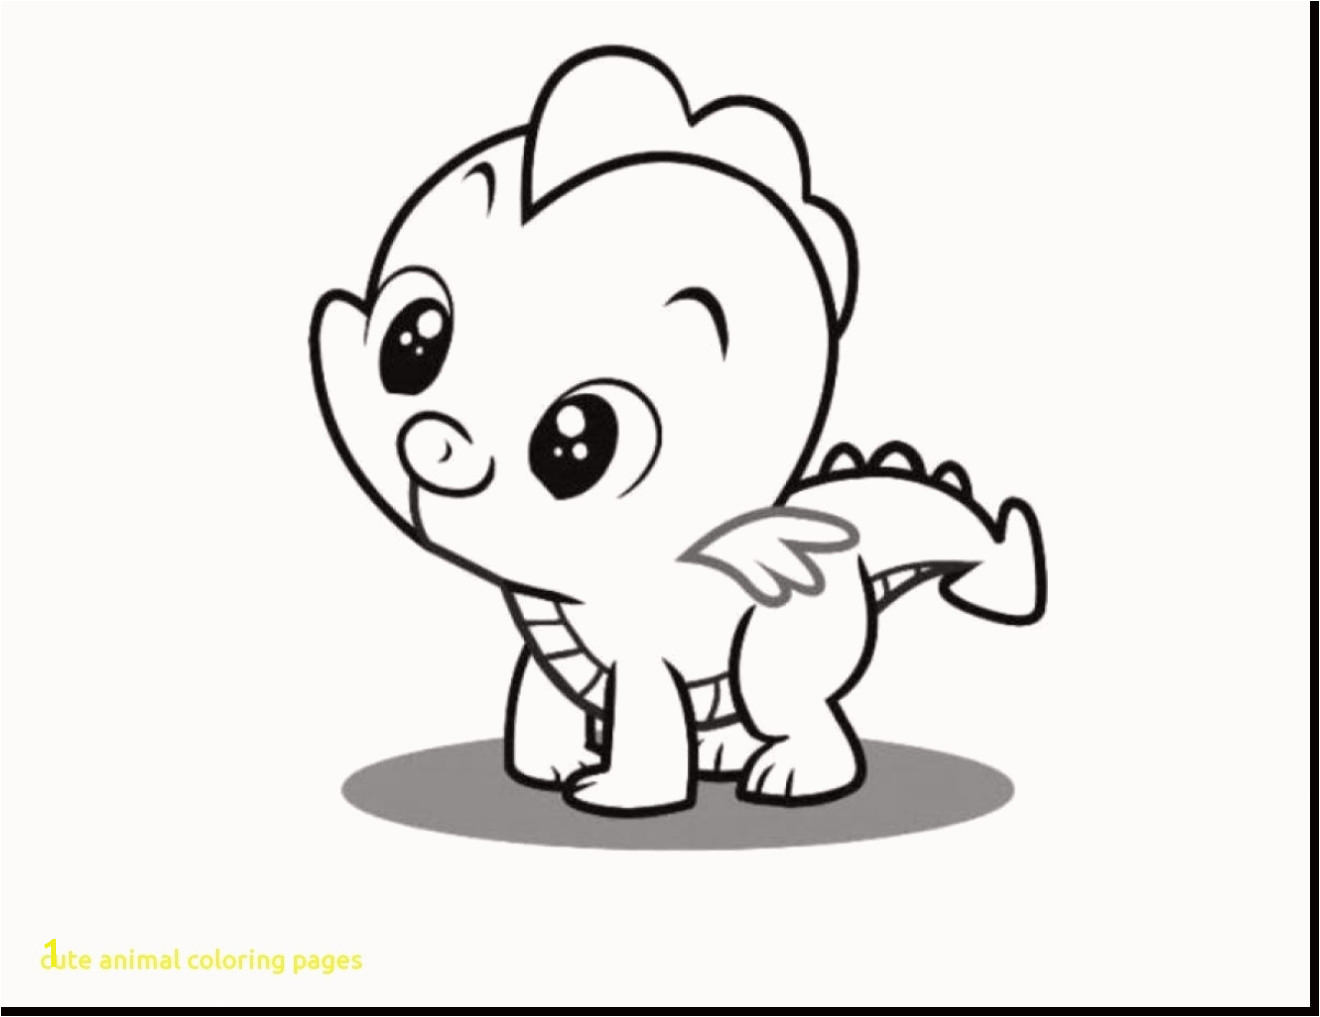 Cute Baby Animal Coloring Pages Dragoart 20 Luxury Dragoart Animals Coloring Pages – Free Coloring Sheets